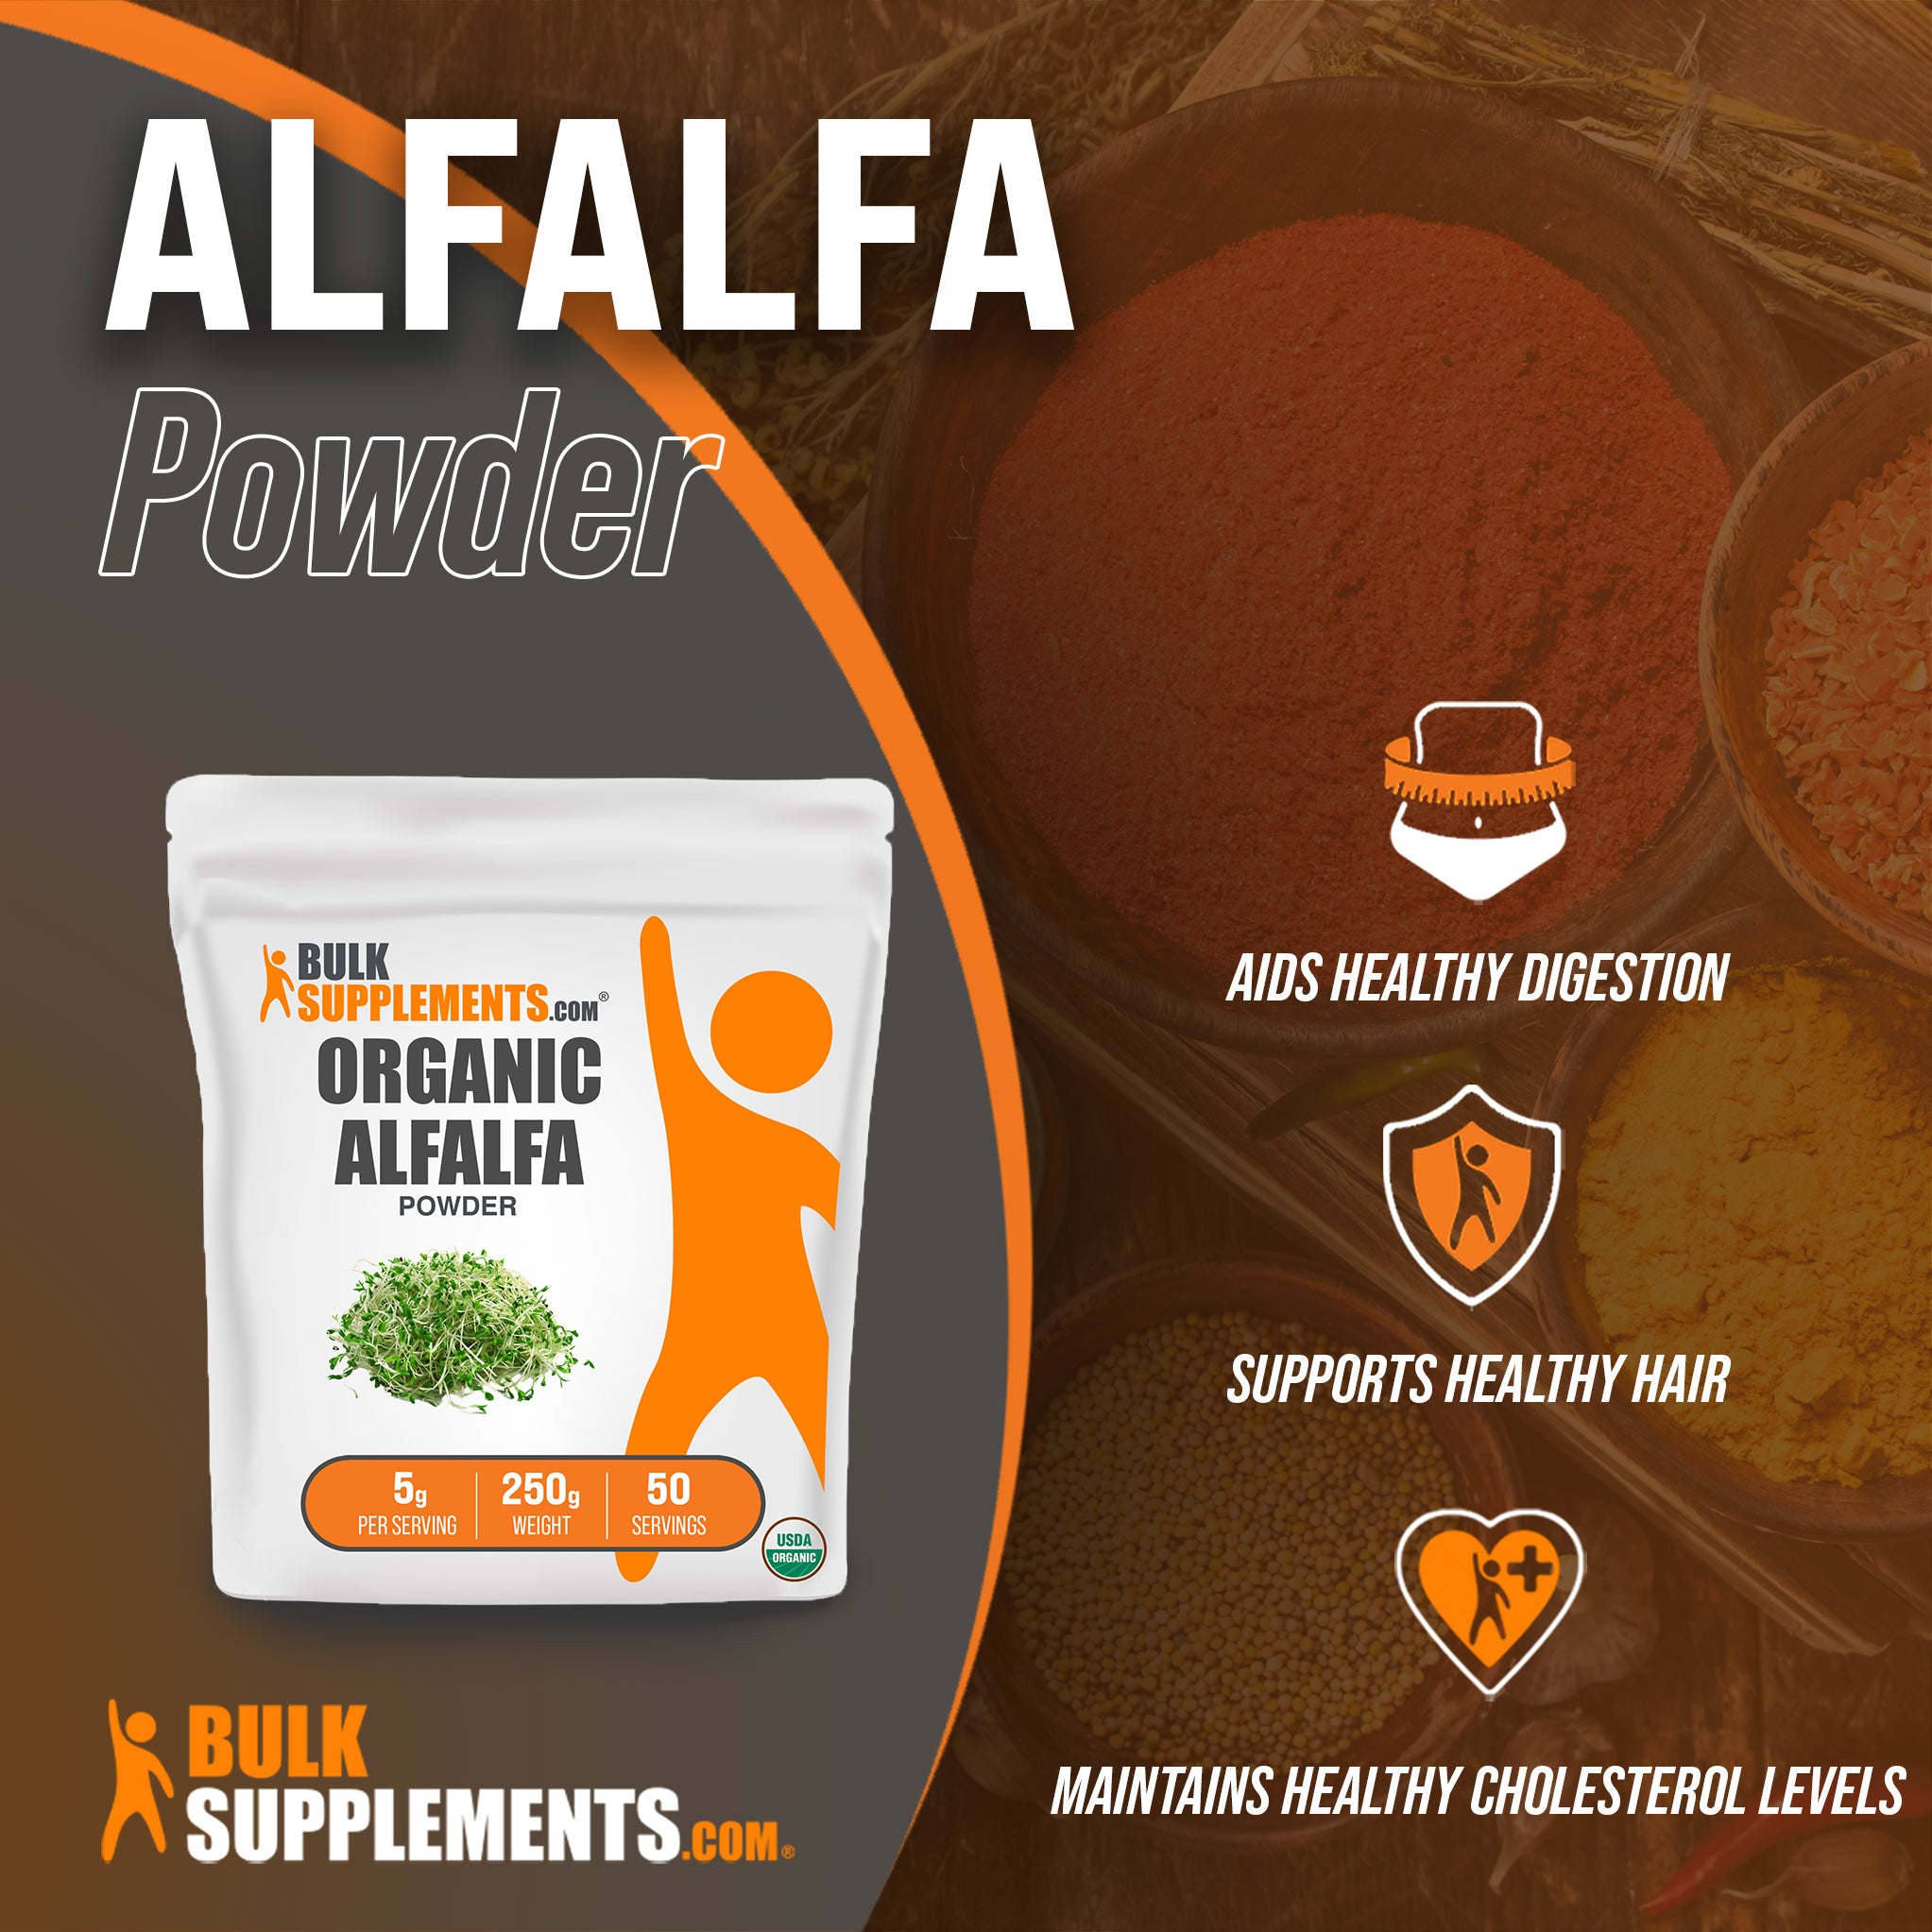 Benefits of Organic Alfalfa Powder: aids healthy digestion, supports healthy hair, maintains healthy cholesterol levels